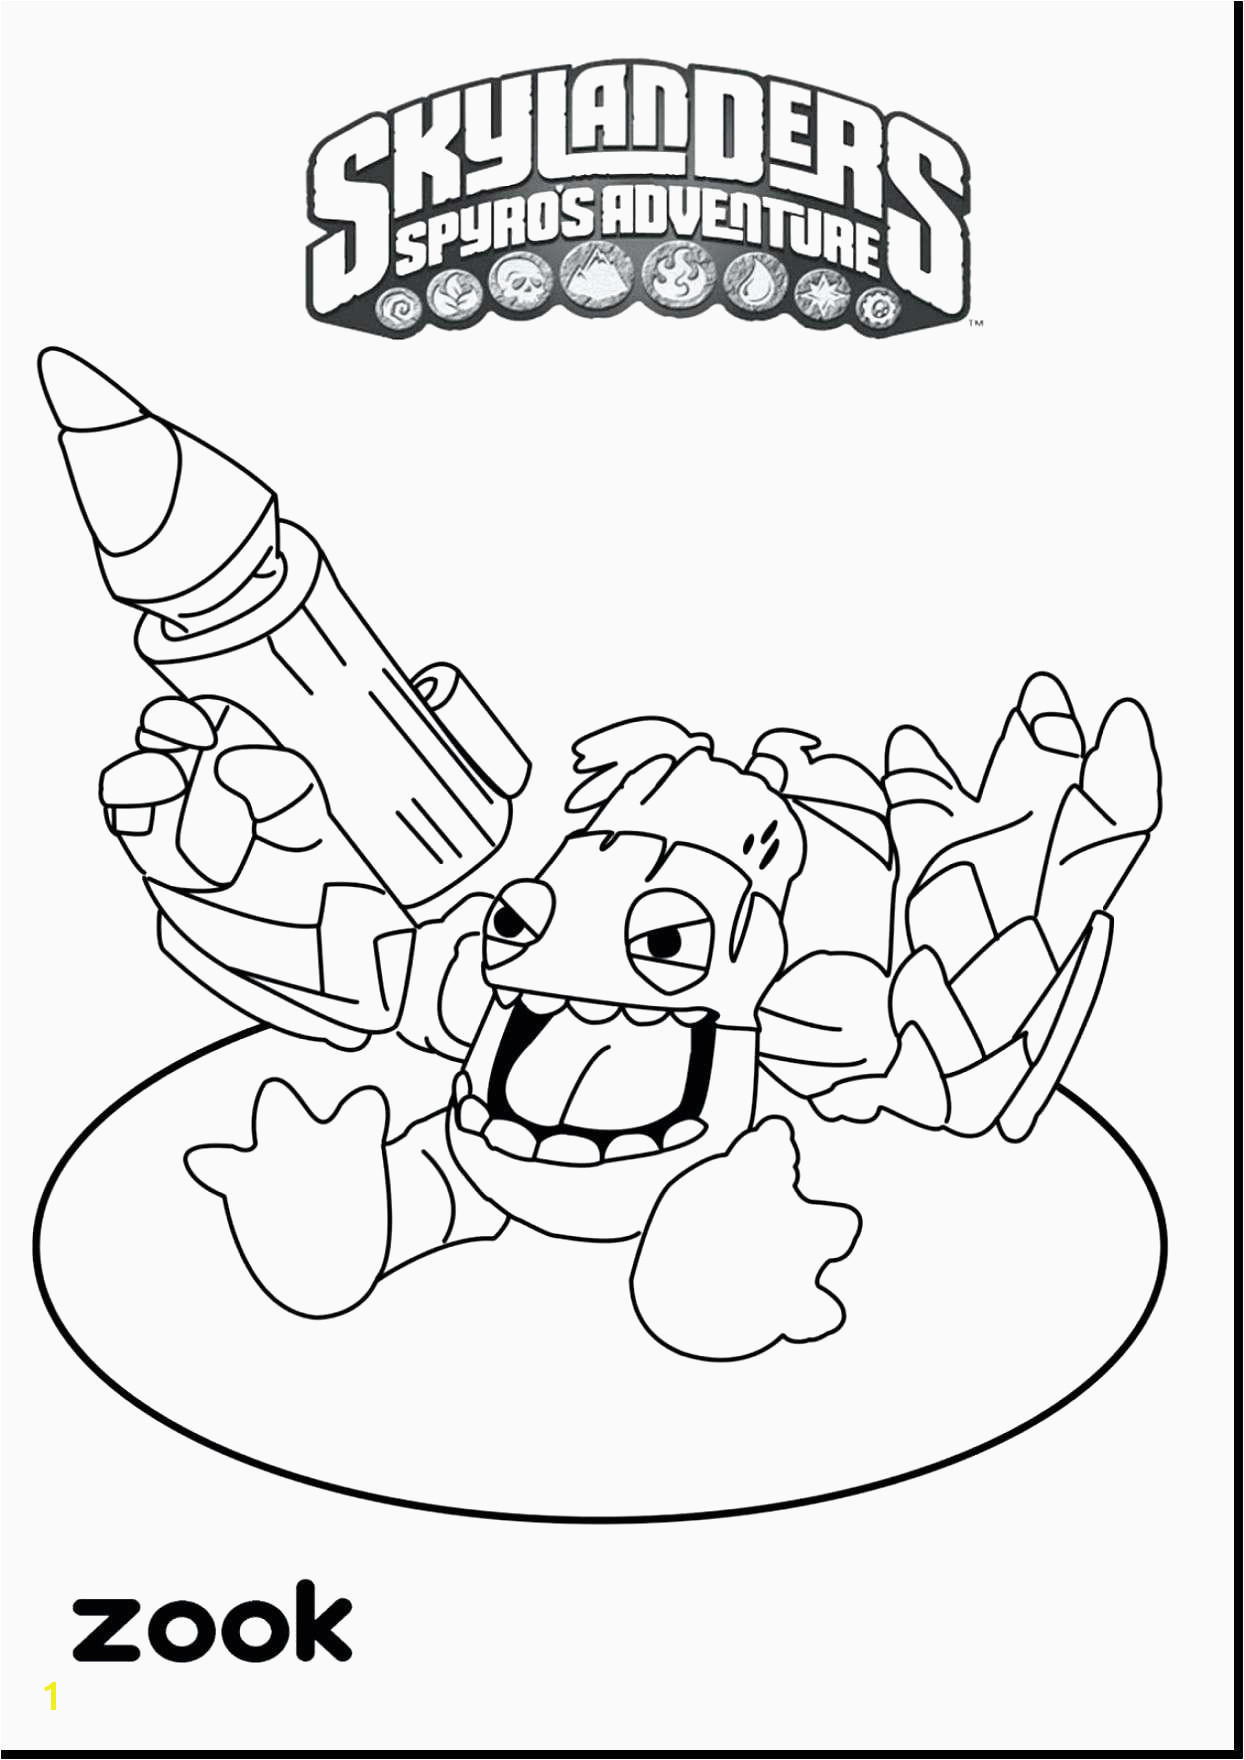 Free Printable Lego Chima Coloring Pages Lego Chima Ausmalbilder Schön 25 New Working Hard Coloring Pages